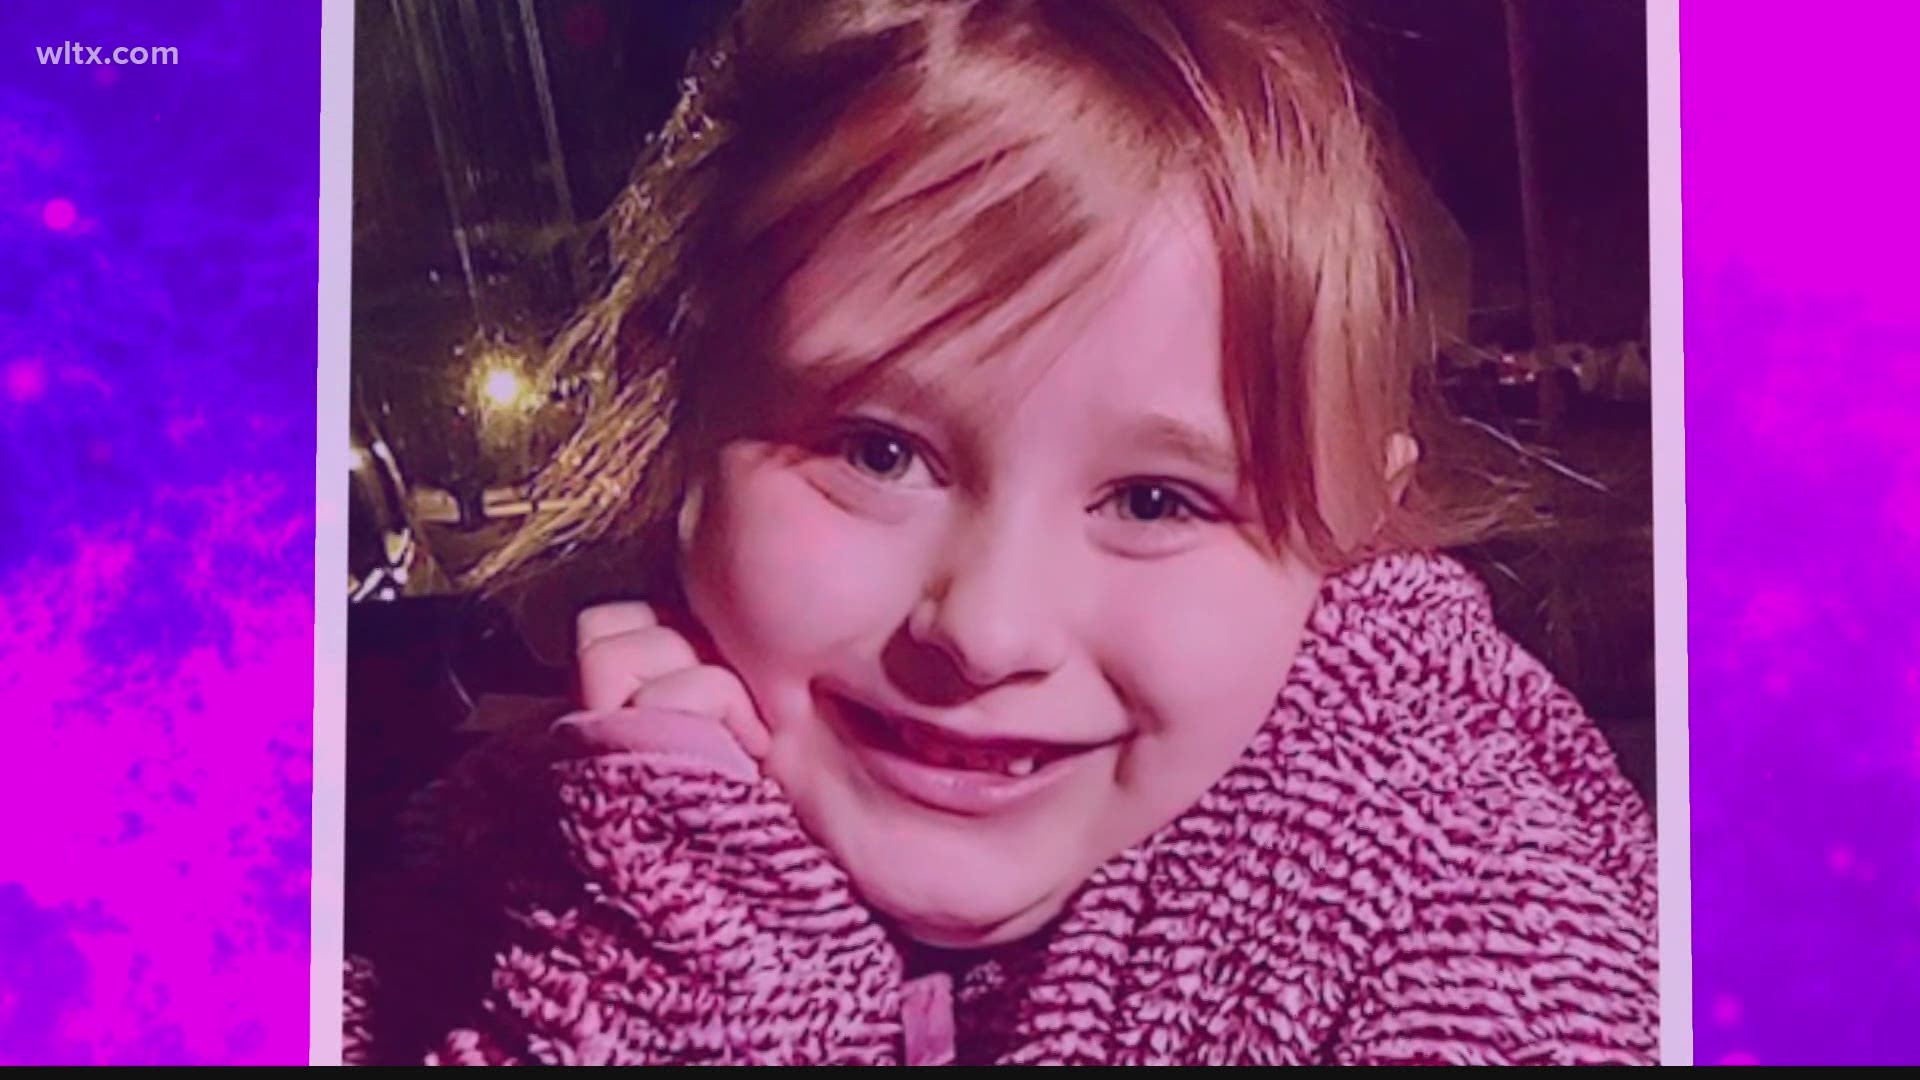 Cayce police have released the final report on the death of Faye Swetlik and have closed the case. The girl was murdered in South Carolina in February of 2020.